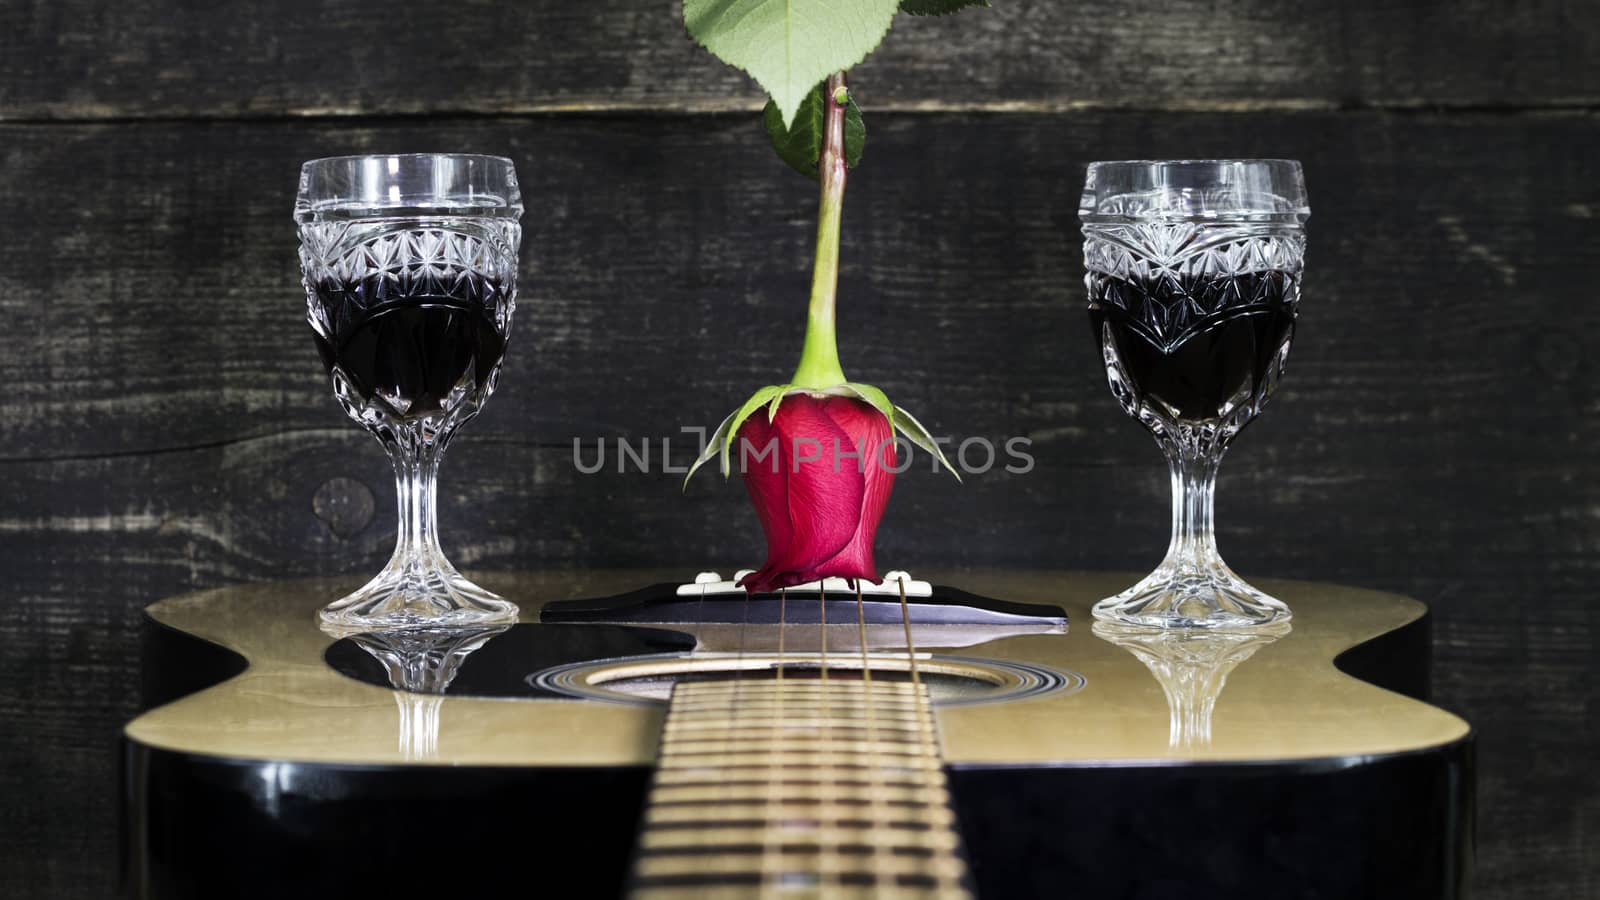 Red Rose and Wine Glasses Resting On Acoustic Guitar With Wooden Background